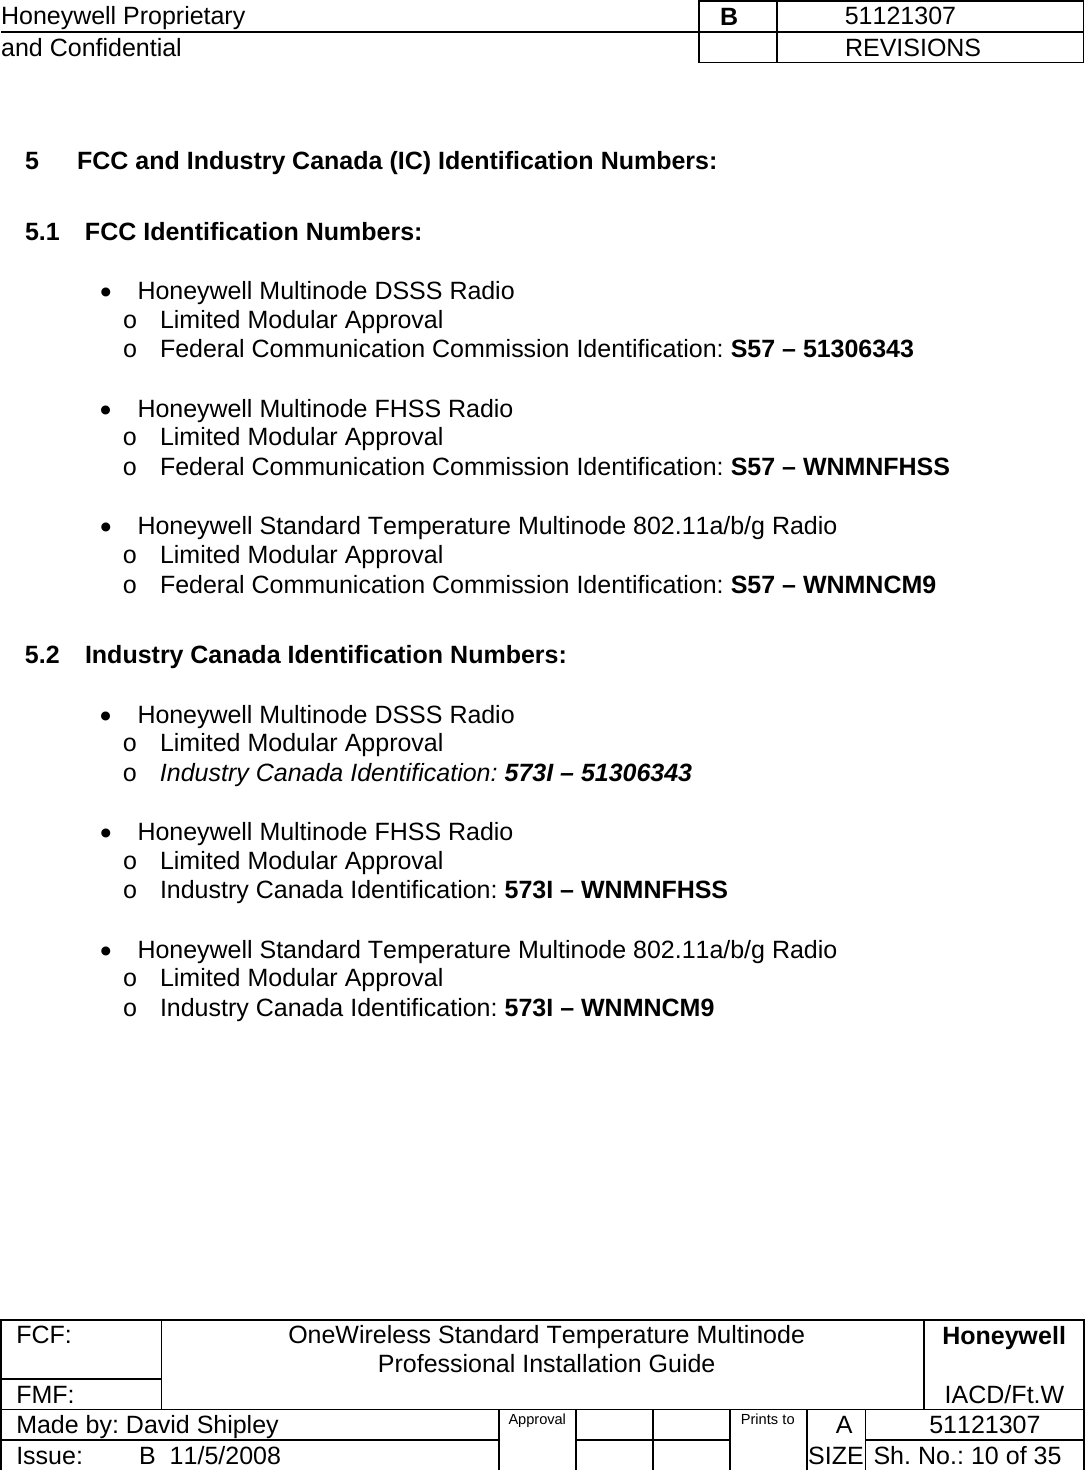 Honeywell Proprietary    B         51121307 and Confidential             REVISIONS  FCF: OneWireless Standard Temperature Multinode  Professional Installation Guide  Honeywell FMF:               IACD/Ft.W Made by: David Shipley  Approval   Prints to     A           51121307 Issue:        B  11/5/2008          SIZE  Sh. No.: 10 of 35   5   FCC and Industry Canada (IC) Identification Numbers:   5.1  FCC Identification Numbers:   •  Honeywell Multinode DSSS Radio  o  Limited Modular Approval    o  Federal Communication Commission Identification: S57 – 51306343    •  Honeywell Multinode FHSS Radio  o  Limited Modular Approval    o  Federal Communication Commission Identification: S57 – WNMNFHSS   •  Honeywell Standard Temperature Multinode 802.11a/b/g Radio  o  Limited Modular Approval    o  Federal Communication Commission Identification: S57 – WNMNCM9   5.2  Industry Canada Identification Numbers:   •  Honeywell Multinode DSSS Radio  o  Limited Modular Approval    o Industry Canada Identification: 573I – 51306343   •  Honeywell Multinode FHSS Radio  o  Limited Modular Approval    o  Industry Canada Identification: 573I – WNMNFHSS   •  Honeywell Standard Temperature Multinode 802.11a/b/g Radio  o  Limited Modular Approval    o  Industry Canada Identification: 573I – WNMNCM9    